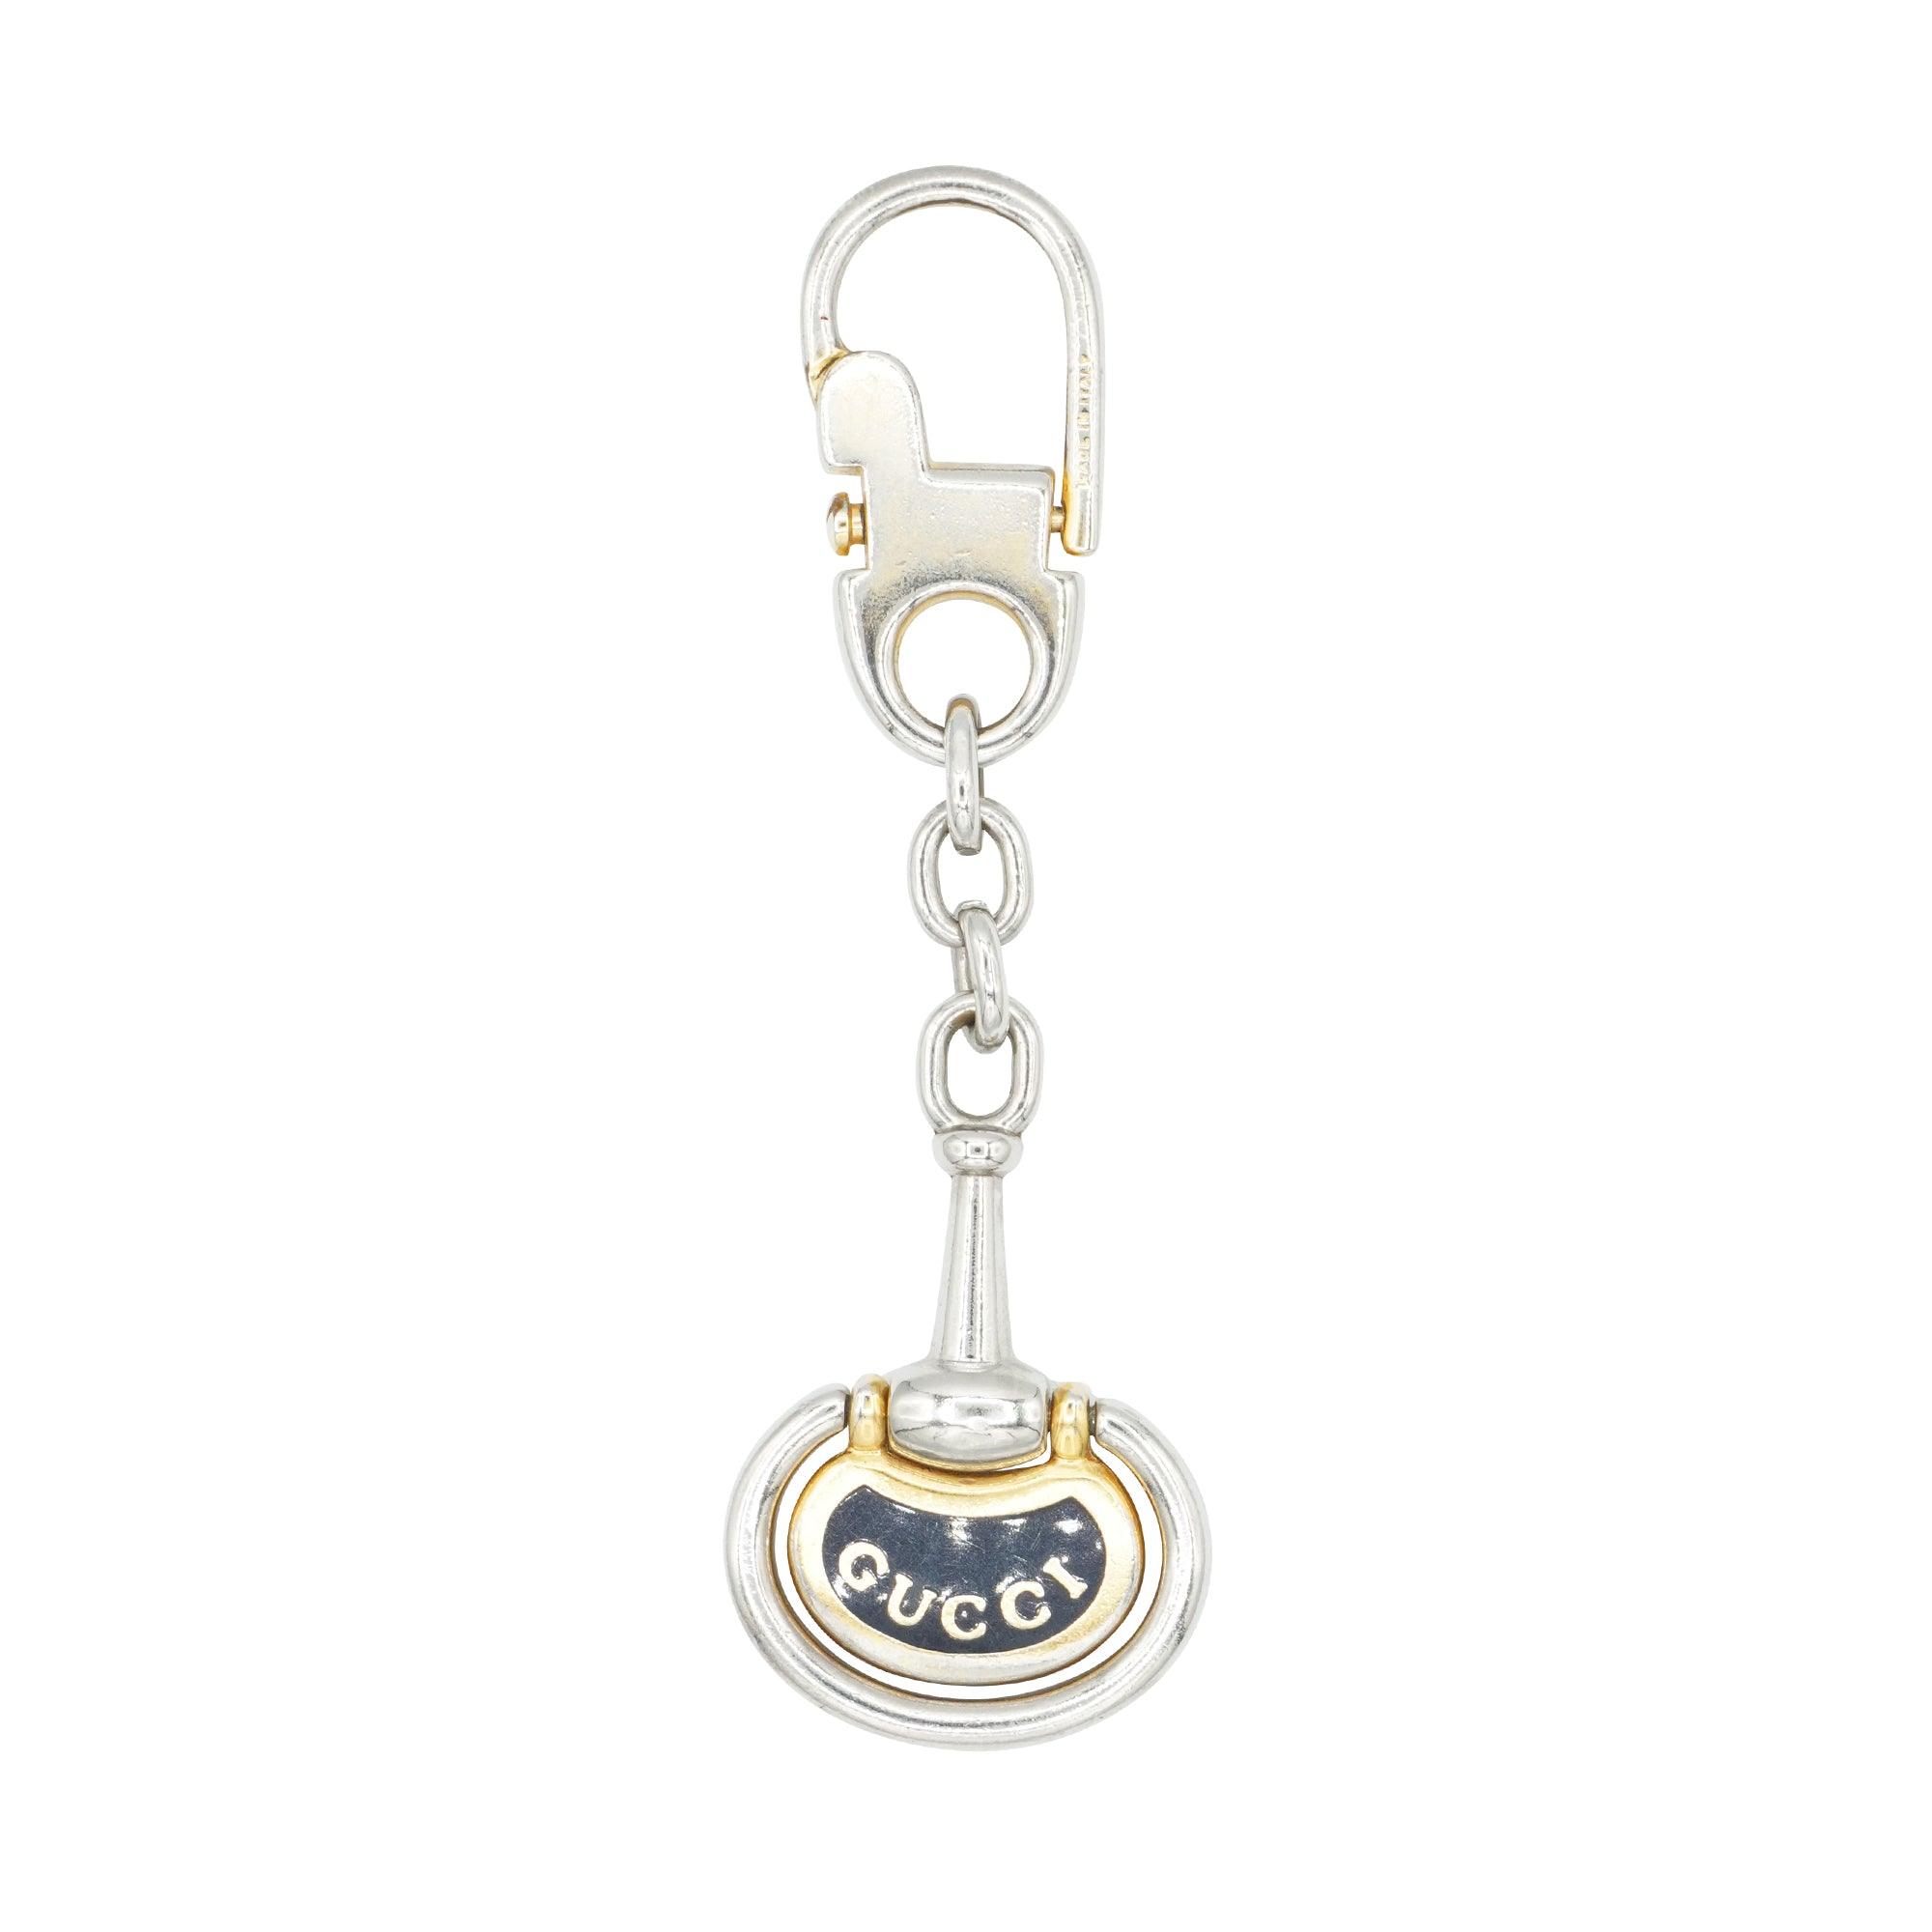 Gucci Keychain - Fashionably Yours